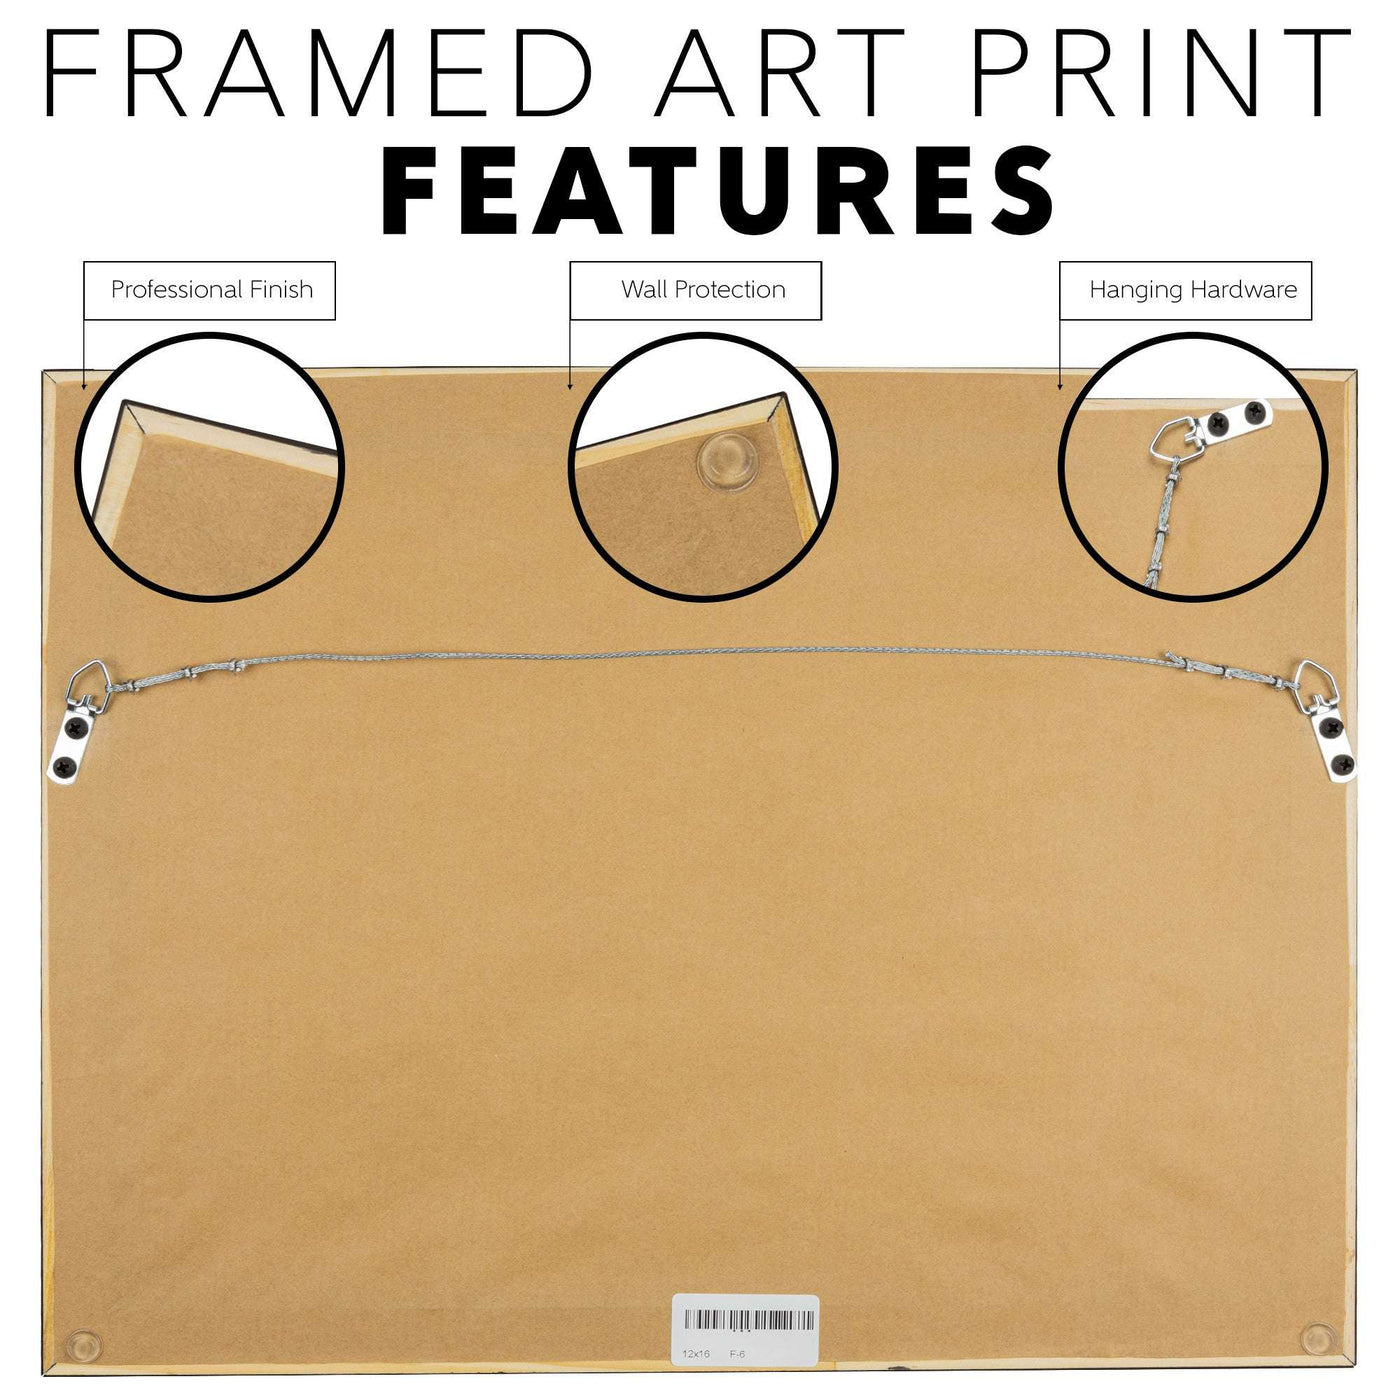 Rear view of a Ferret Flight Framed Print showing the hanging hardware, protective wall bumpers, and a professional finish highlighted by circles.